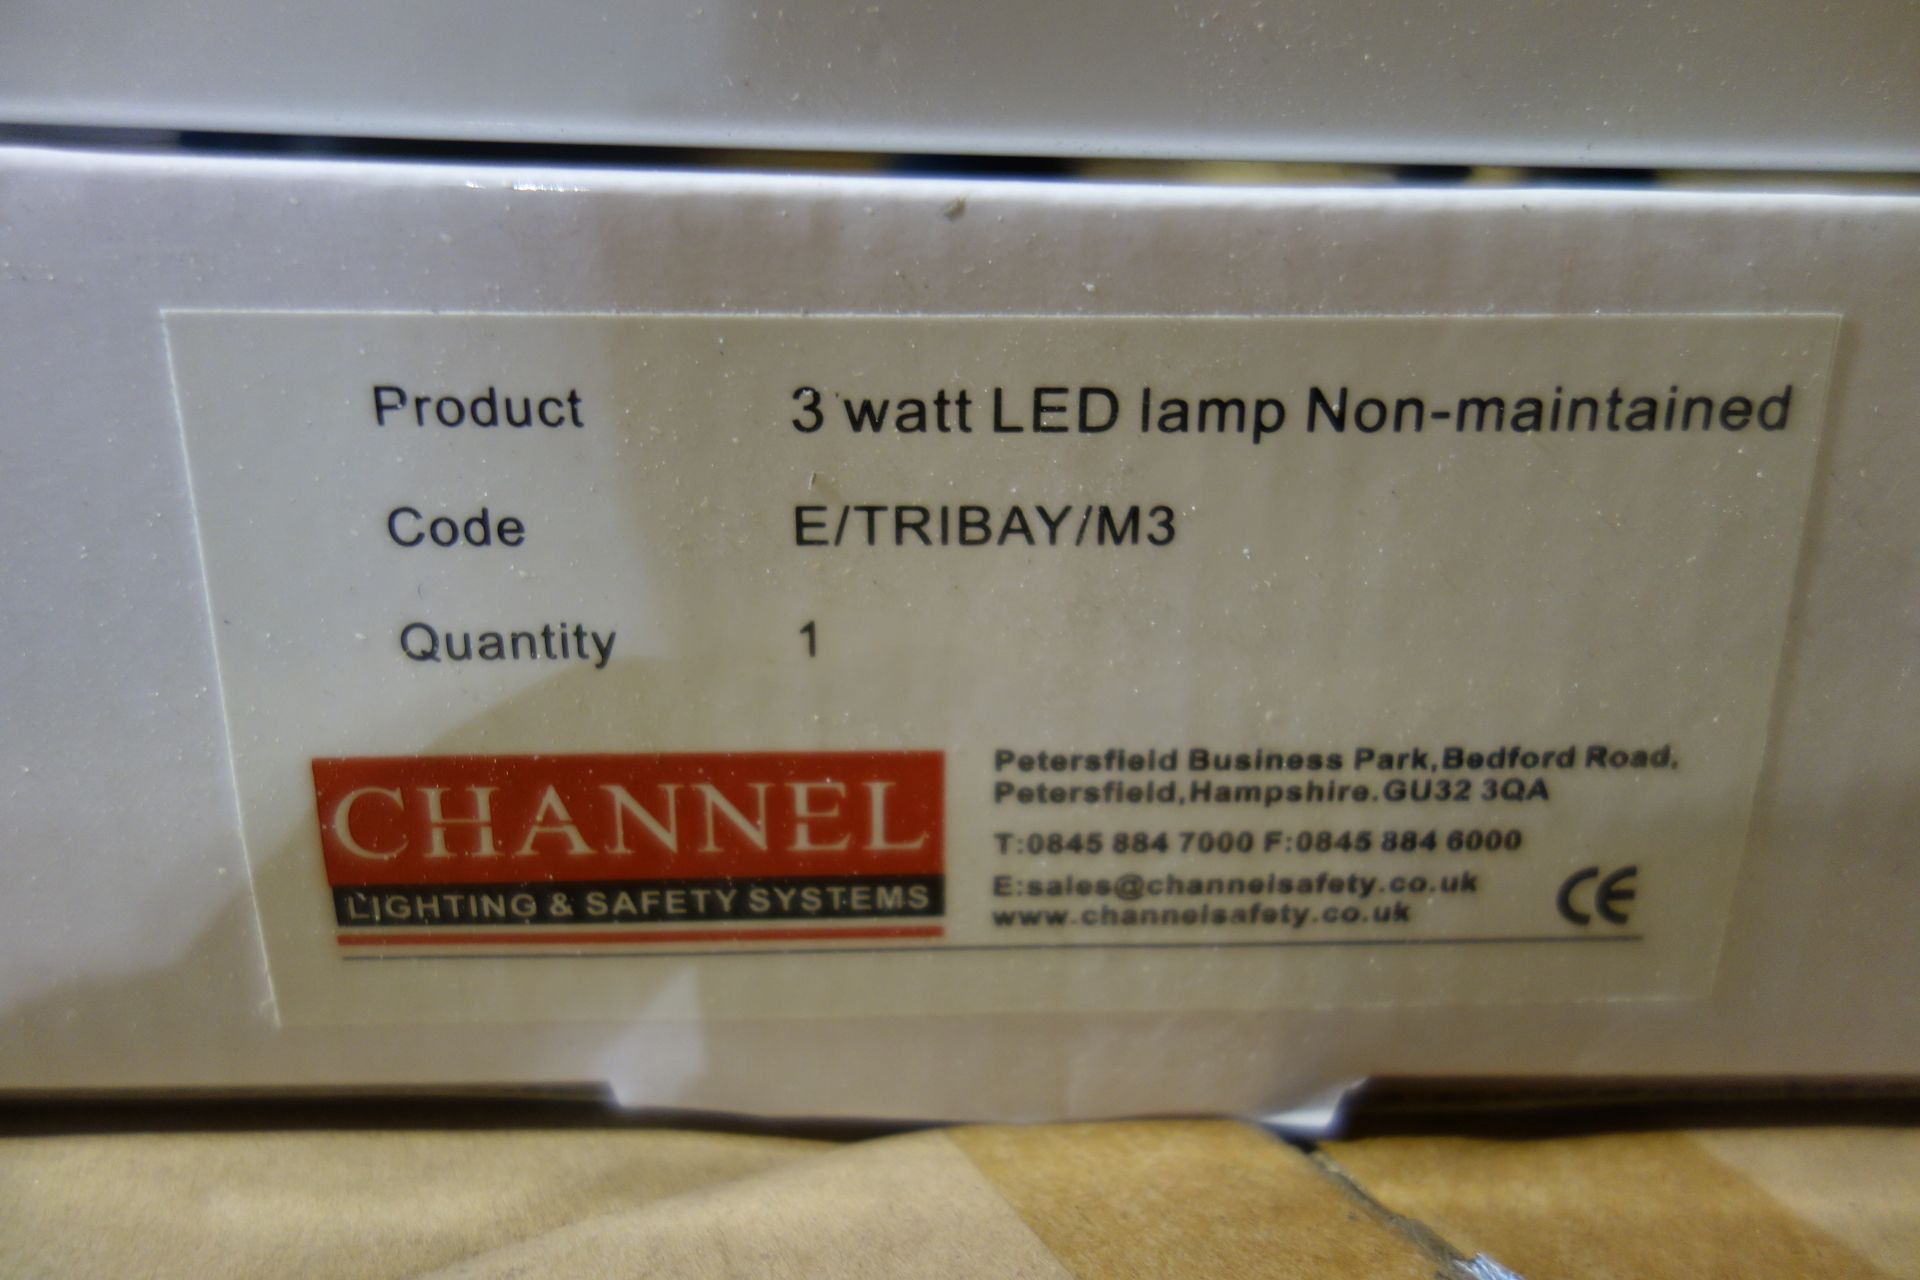 4 X Channel E/TRIBAY/M3 3W LED Non-Maintained Emergency Fitting